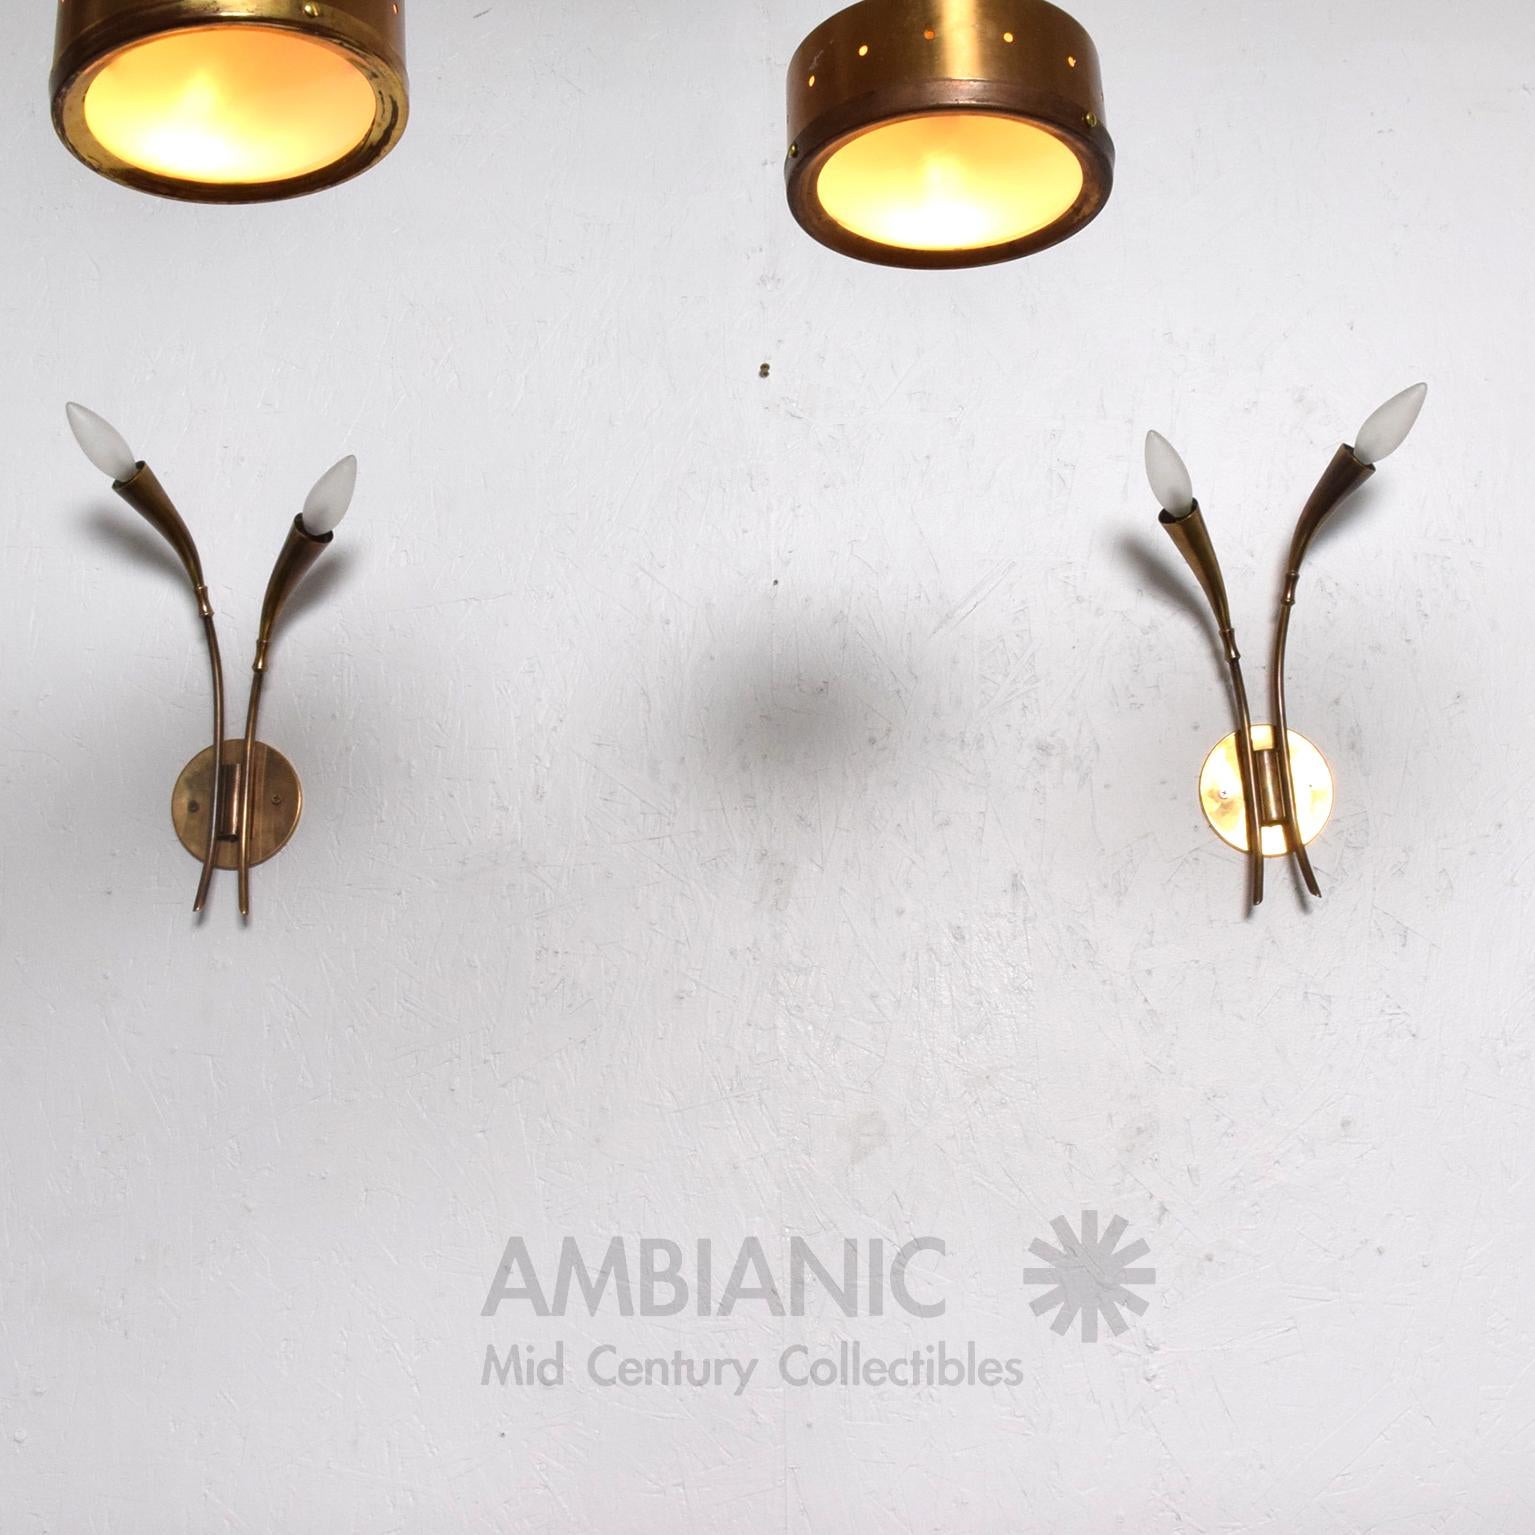 Wall Lamps
Italian Wall Sconces in Patinated Brass. Flower bud form.
Two arms each sconce.
Italy, circa 1950s. Vintage midcentury preowned condition.
Rewired and ready to go.
Sconces require four (4) E-14 Bulbs, not included.
Measures: 13 .5 tall x